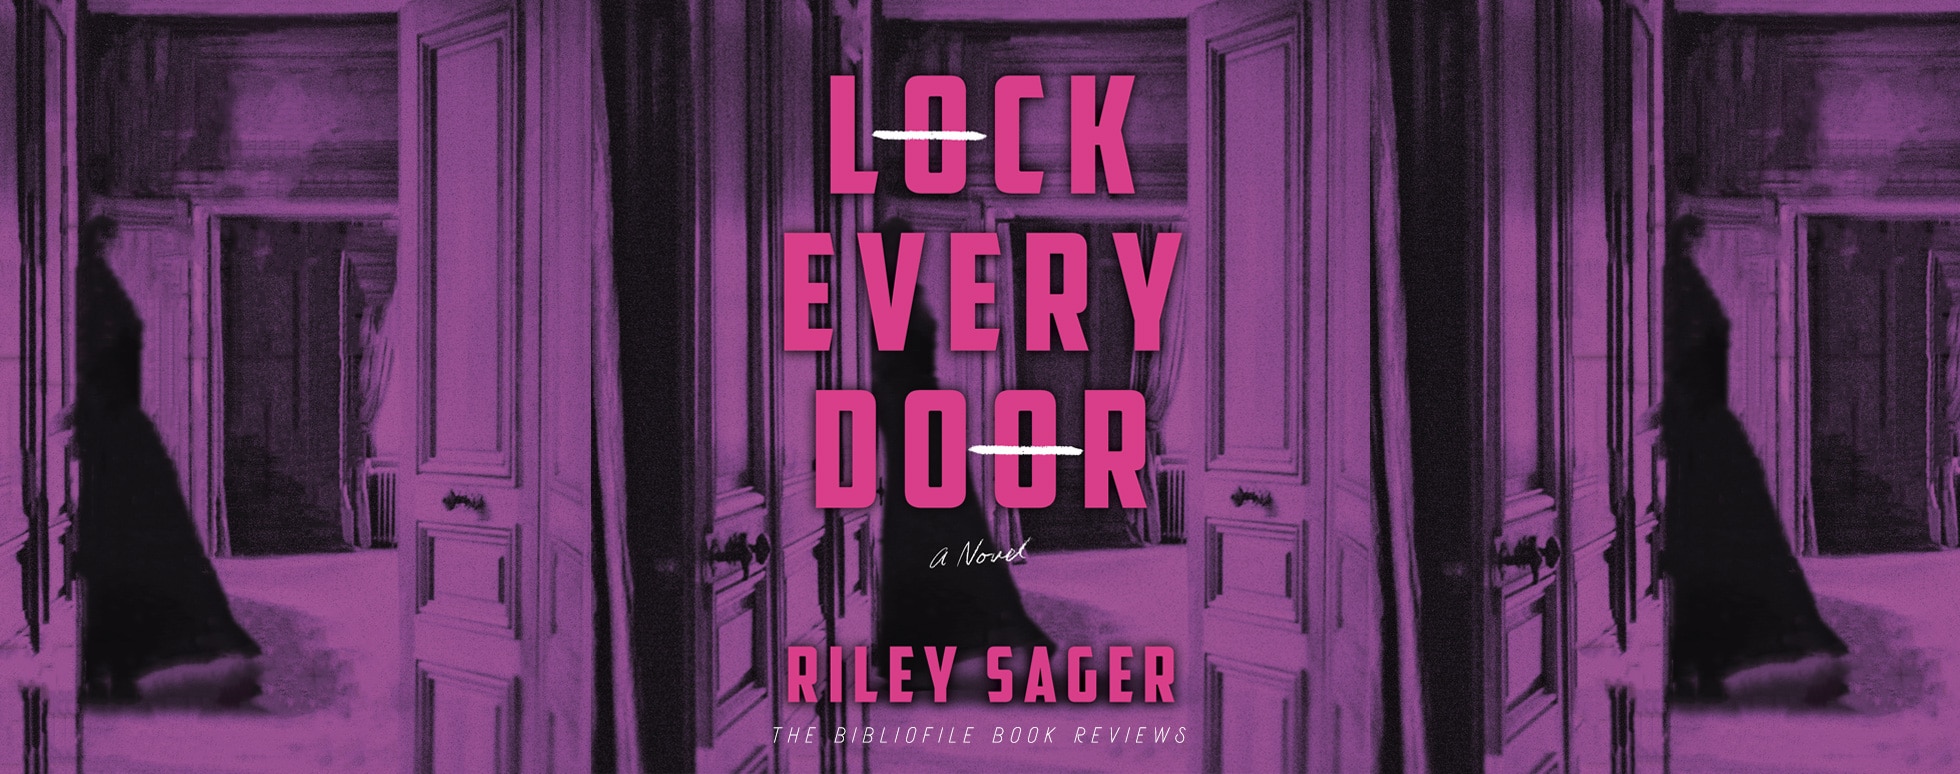 lock every door riley sager summary review